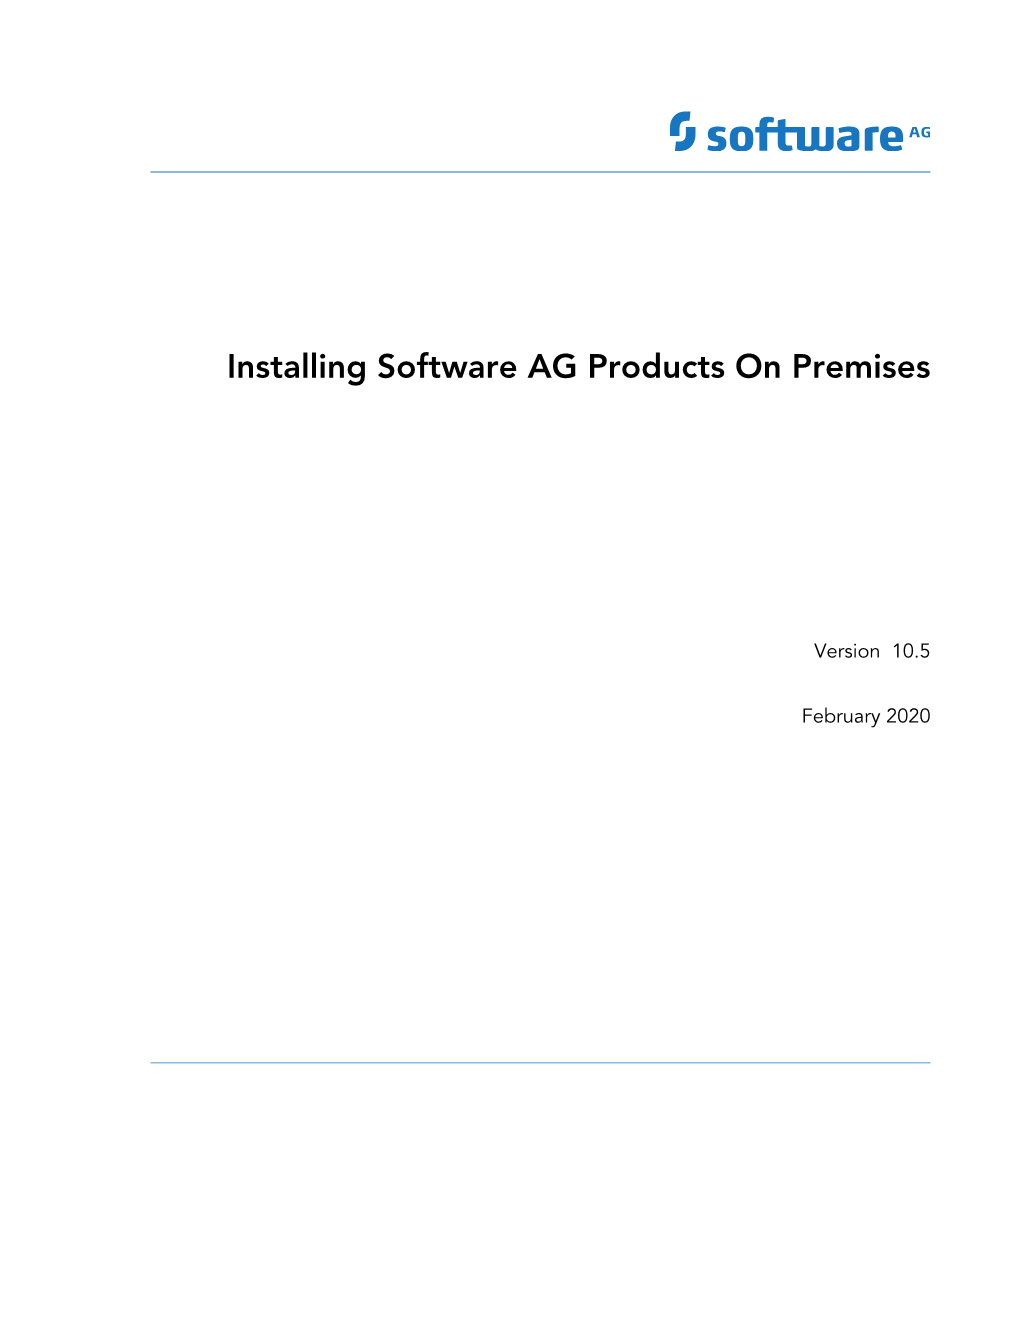 Installing Software AG Products on Premises